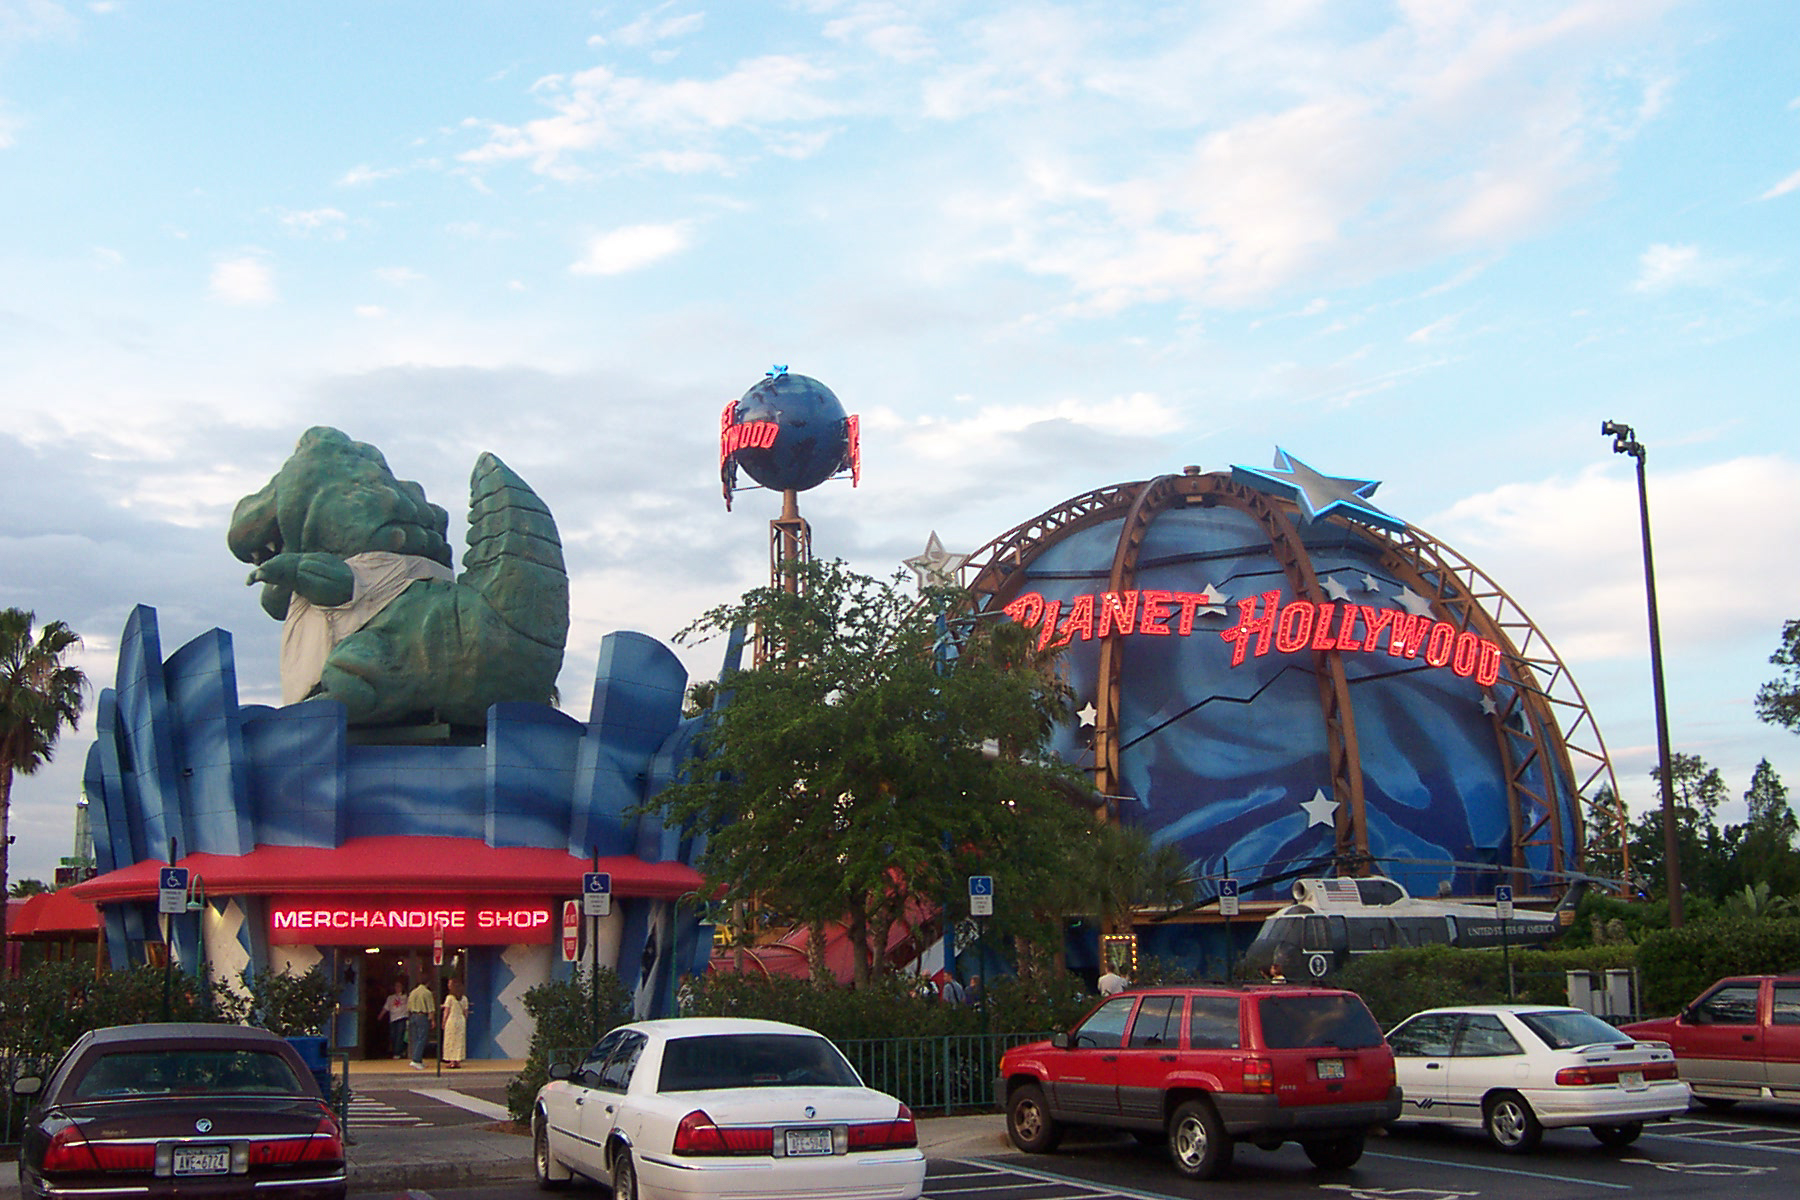 Planet Hollywood Orlando from the parking lot